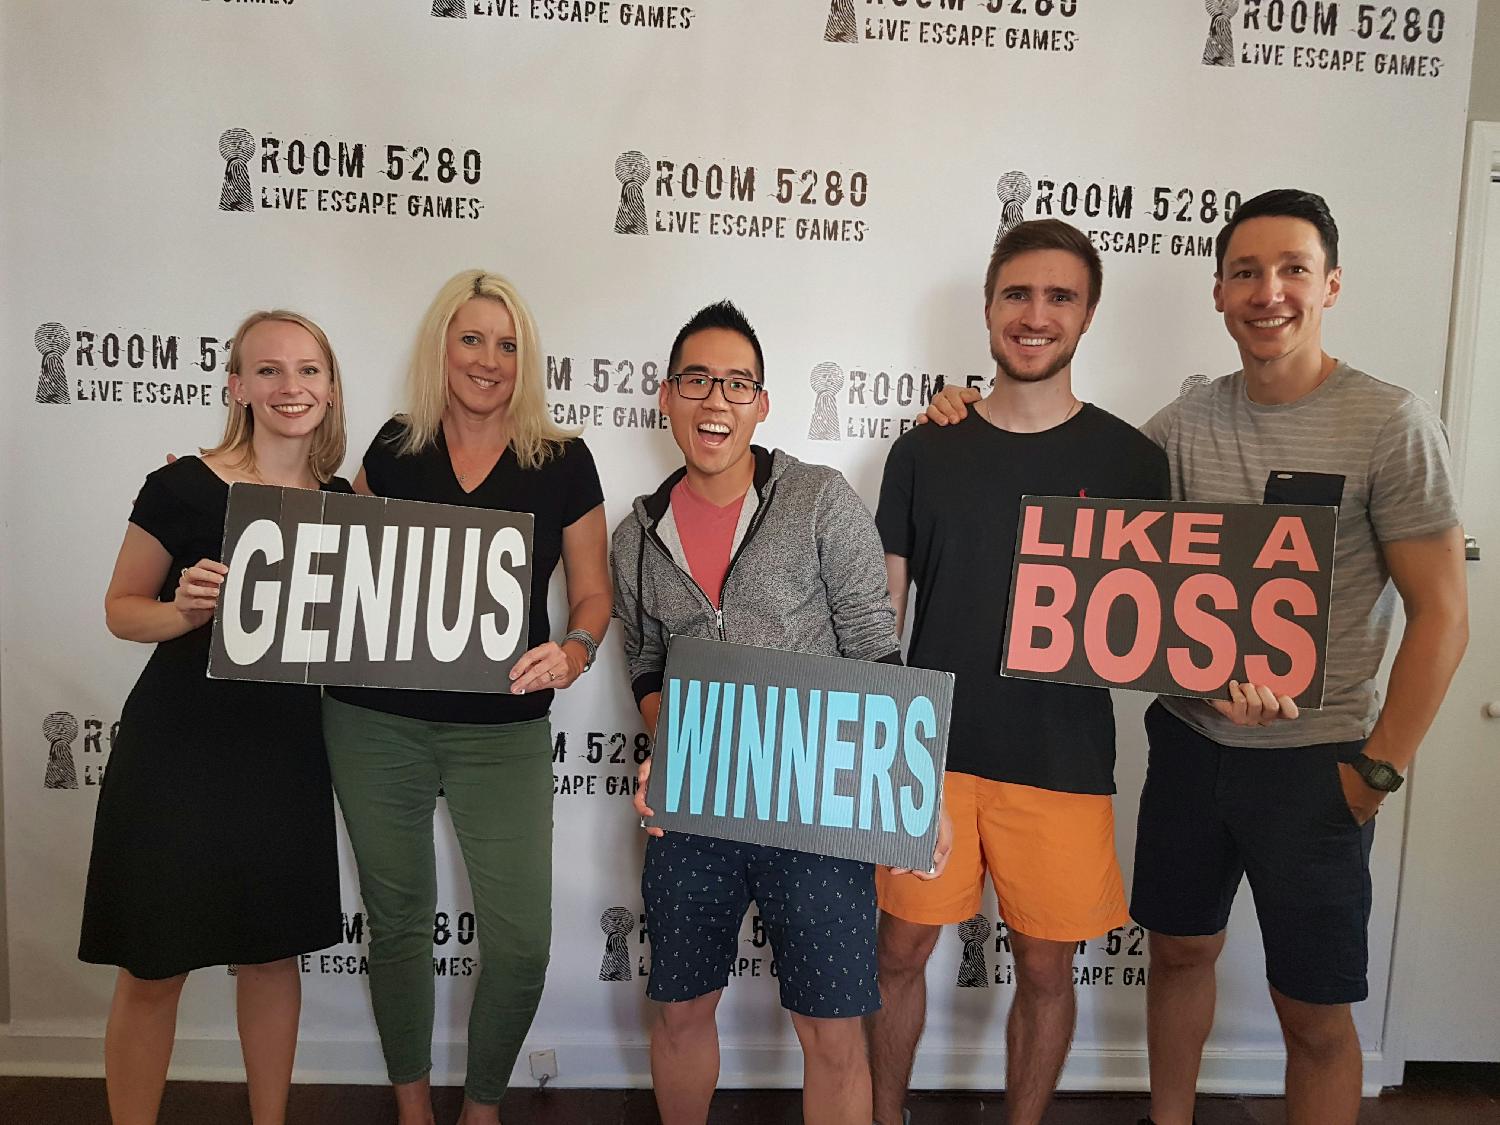 One of our favorite team events - escape room competition!